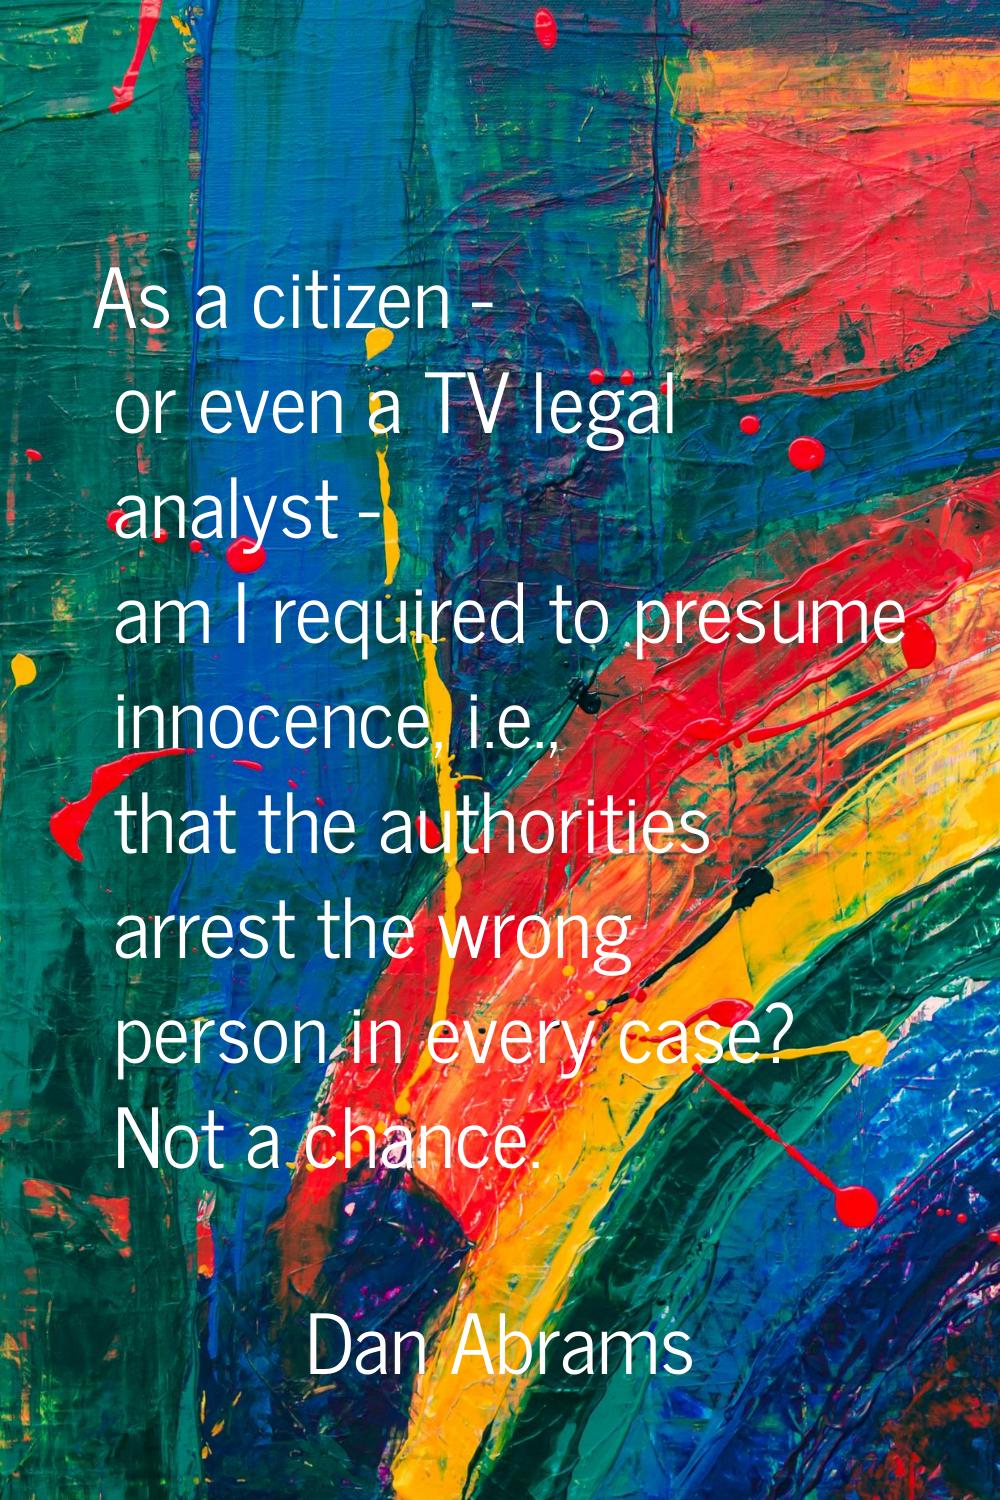 As a citizen - or even a TV legal analyst - am I required to presume innocence, i.e., that the auth